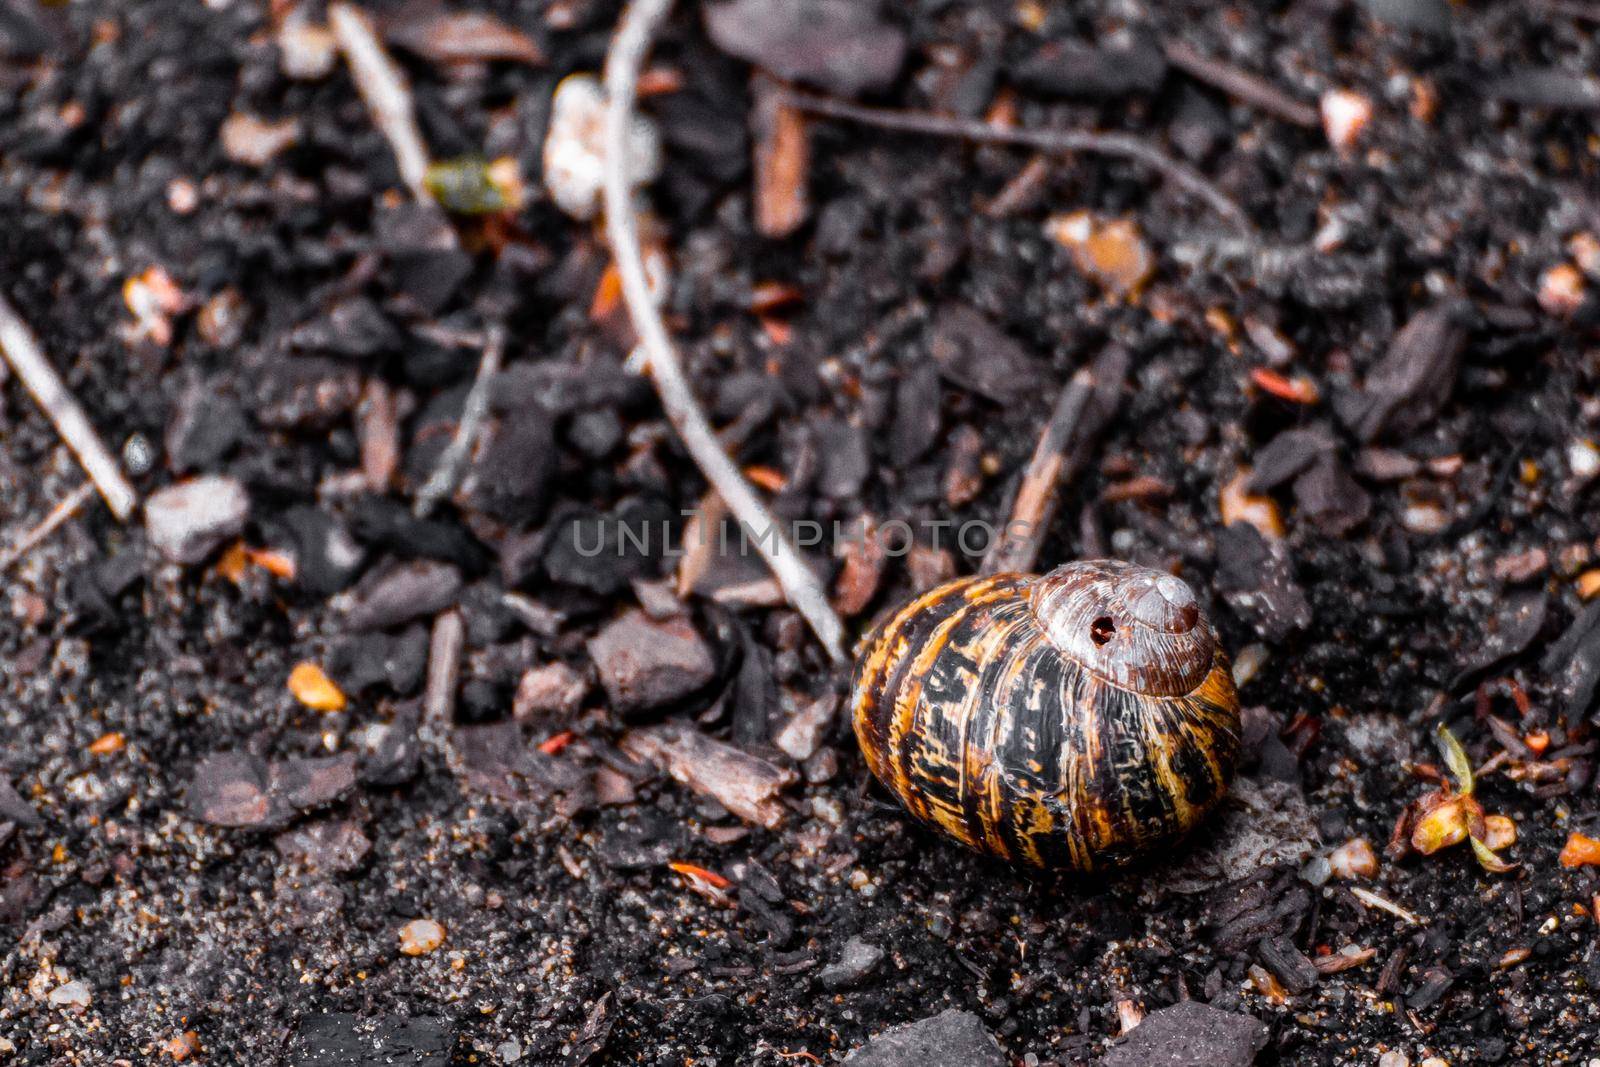 Close-up of a black and yellow snail shell lying on some dark soil between stones and twigs